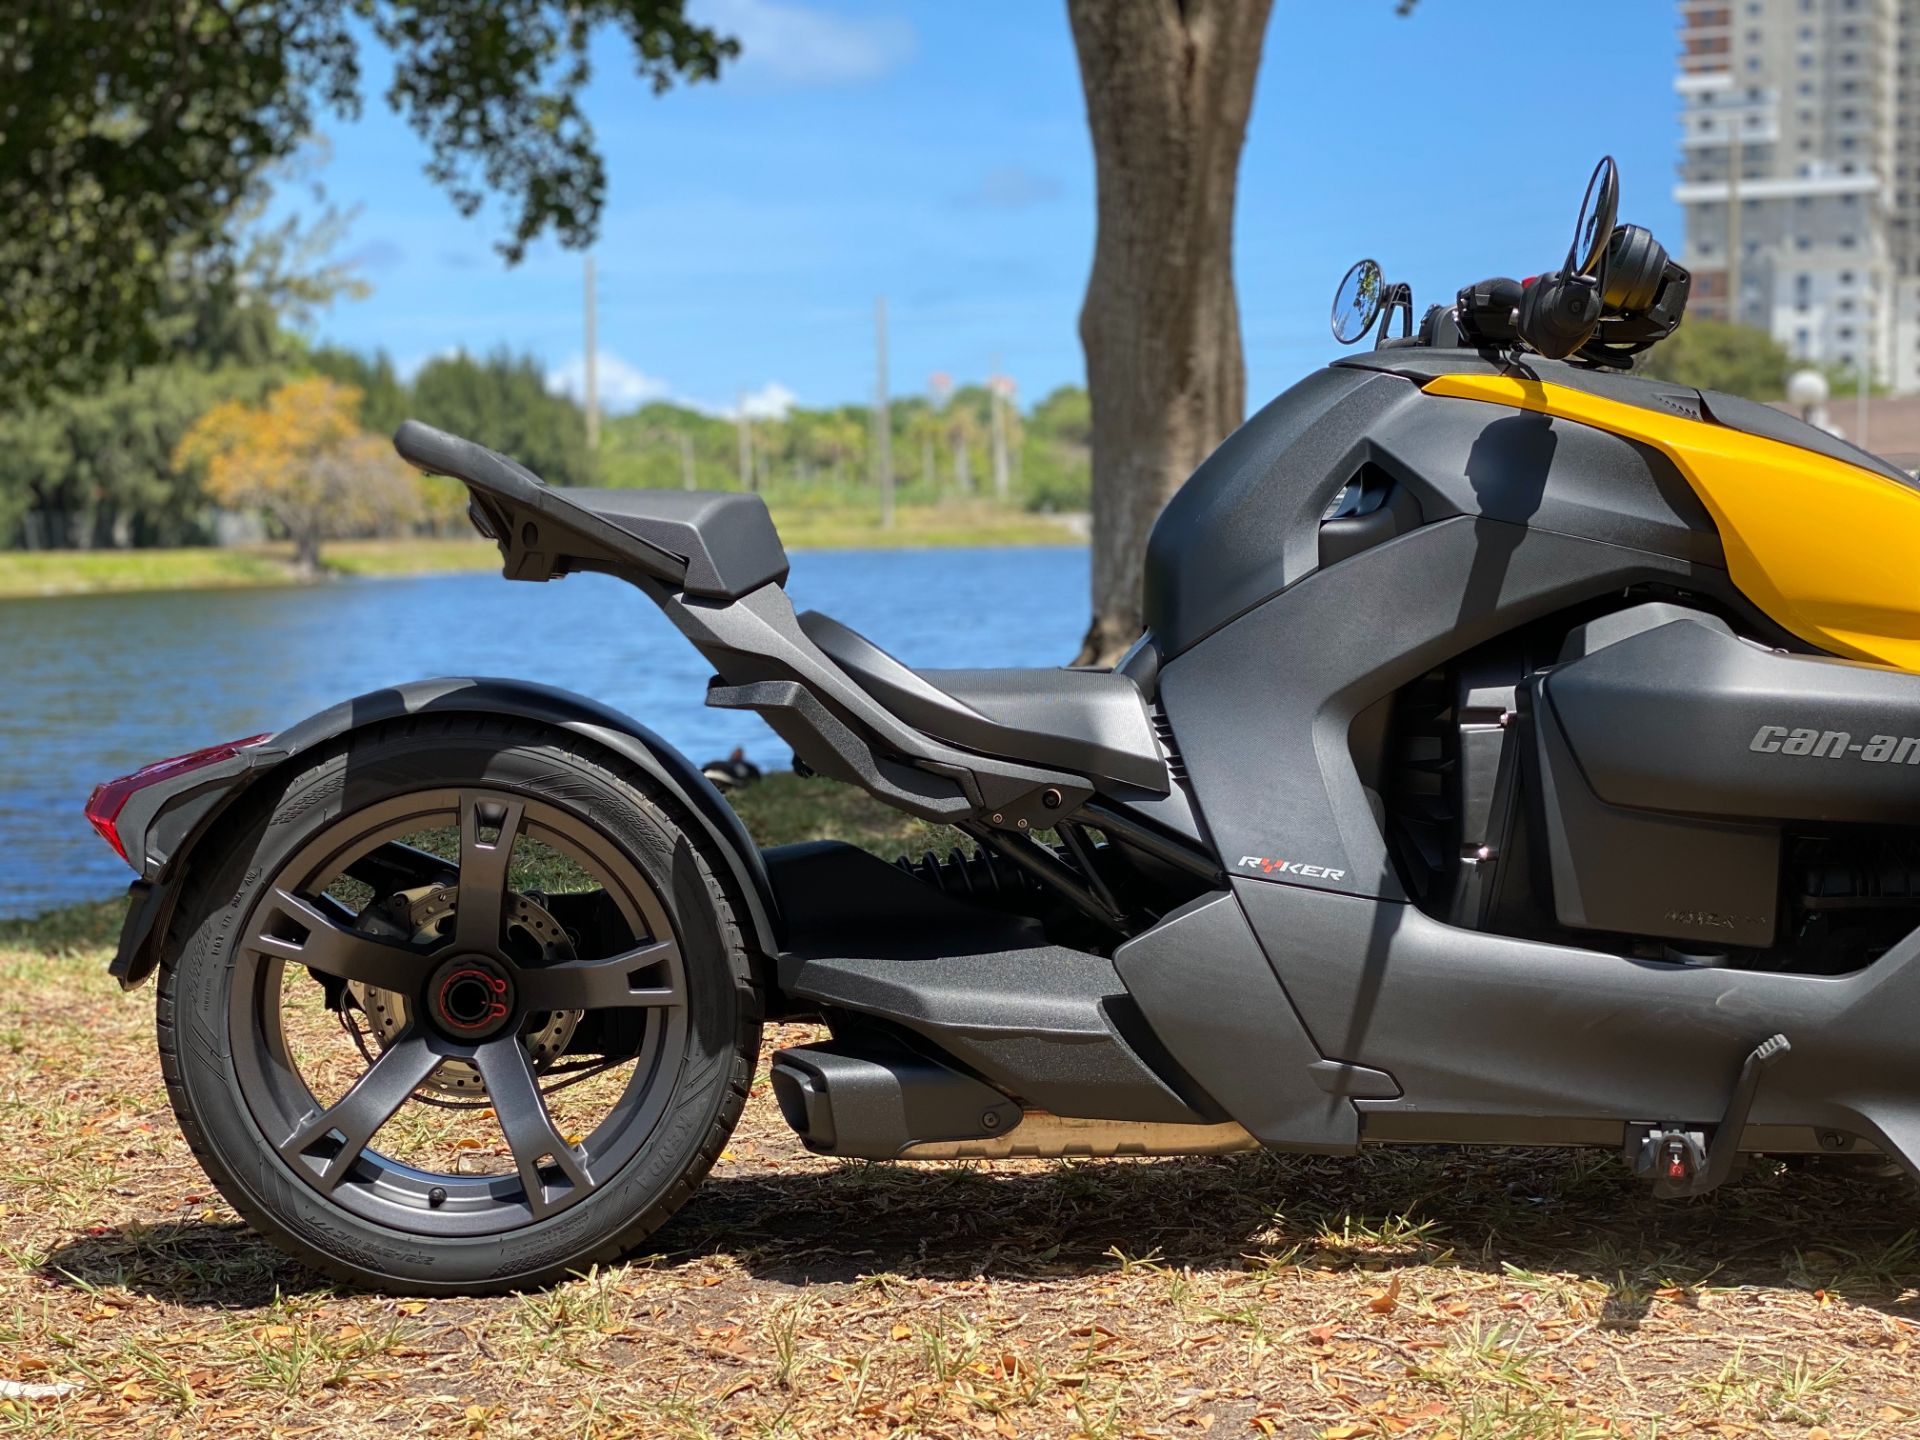 2020 Can-Am Ryker 900 ACE in North Miami Beach, Florida - Photo 6